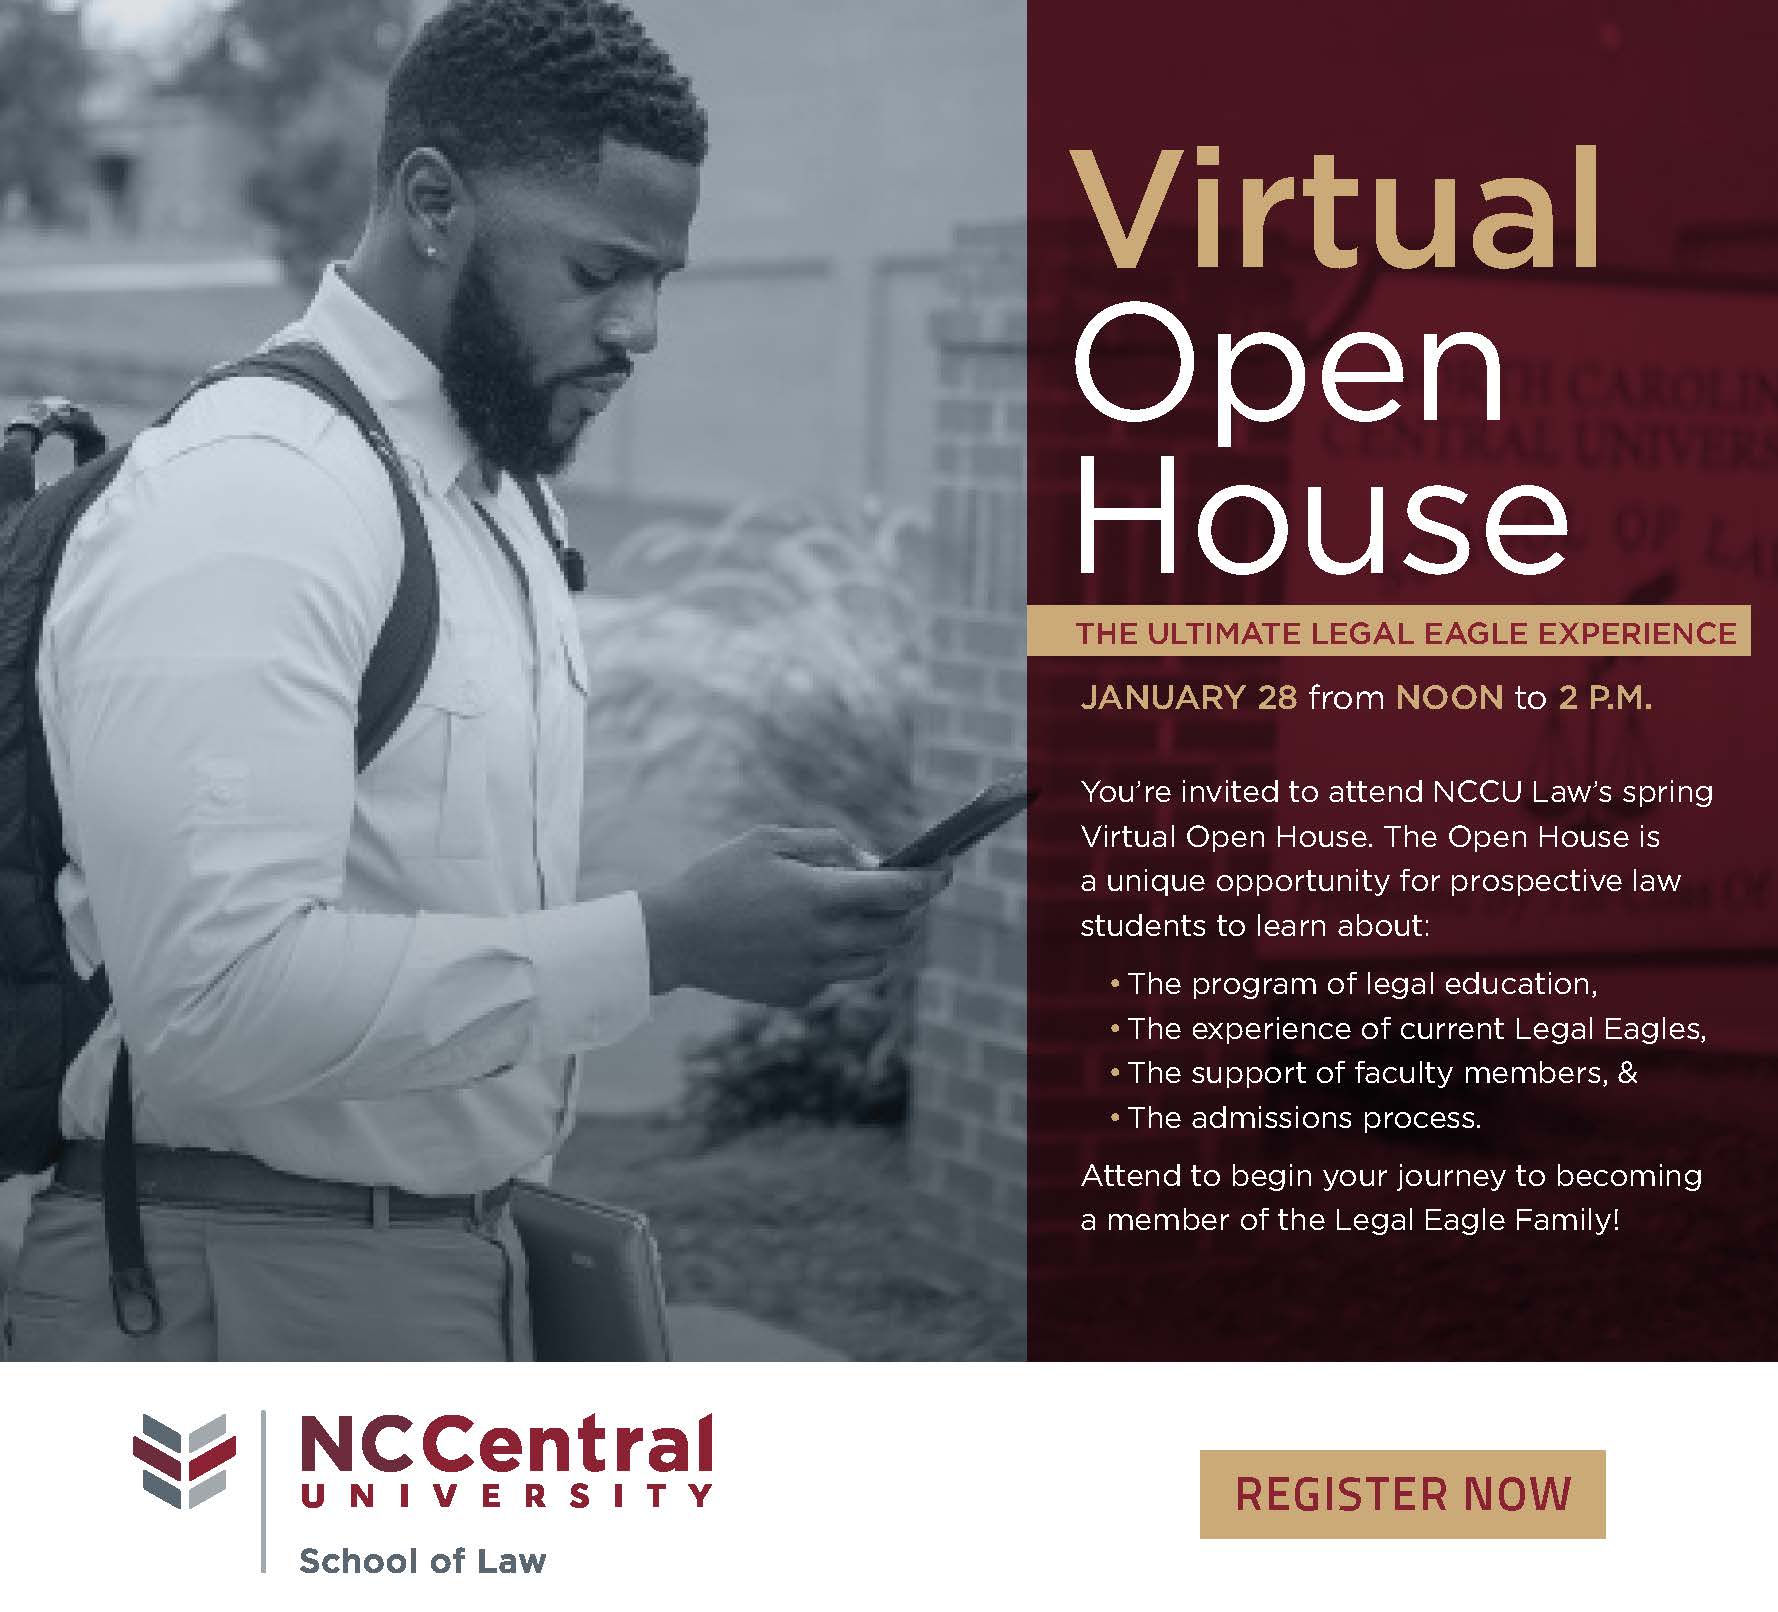 NCCU School of Law Virtual Open House: The Ultimate Legal Eagle Experience